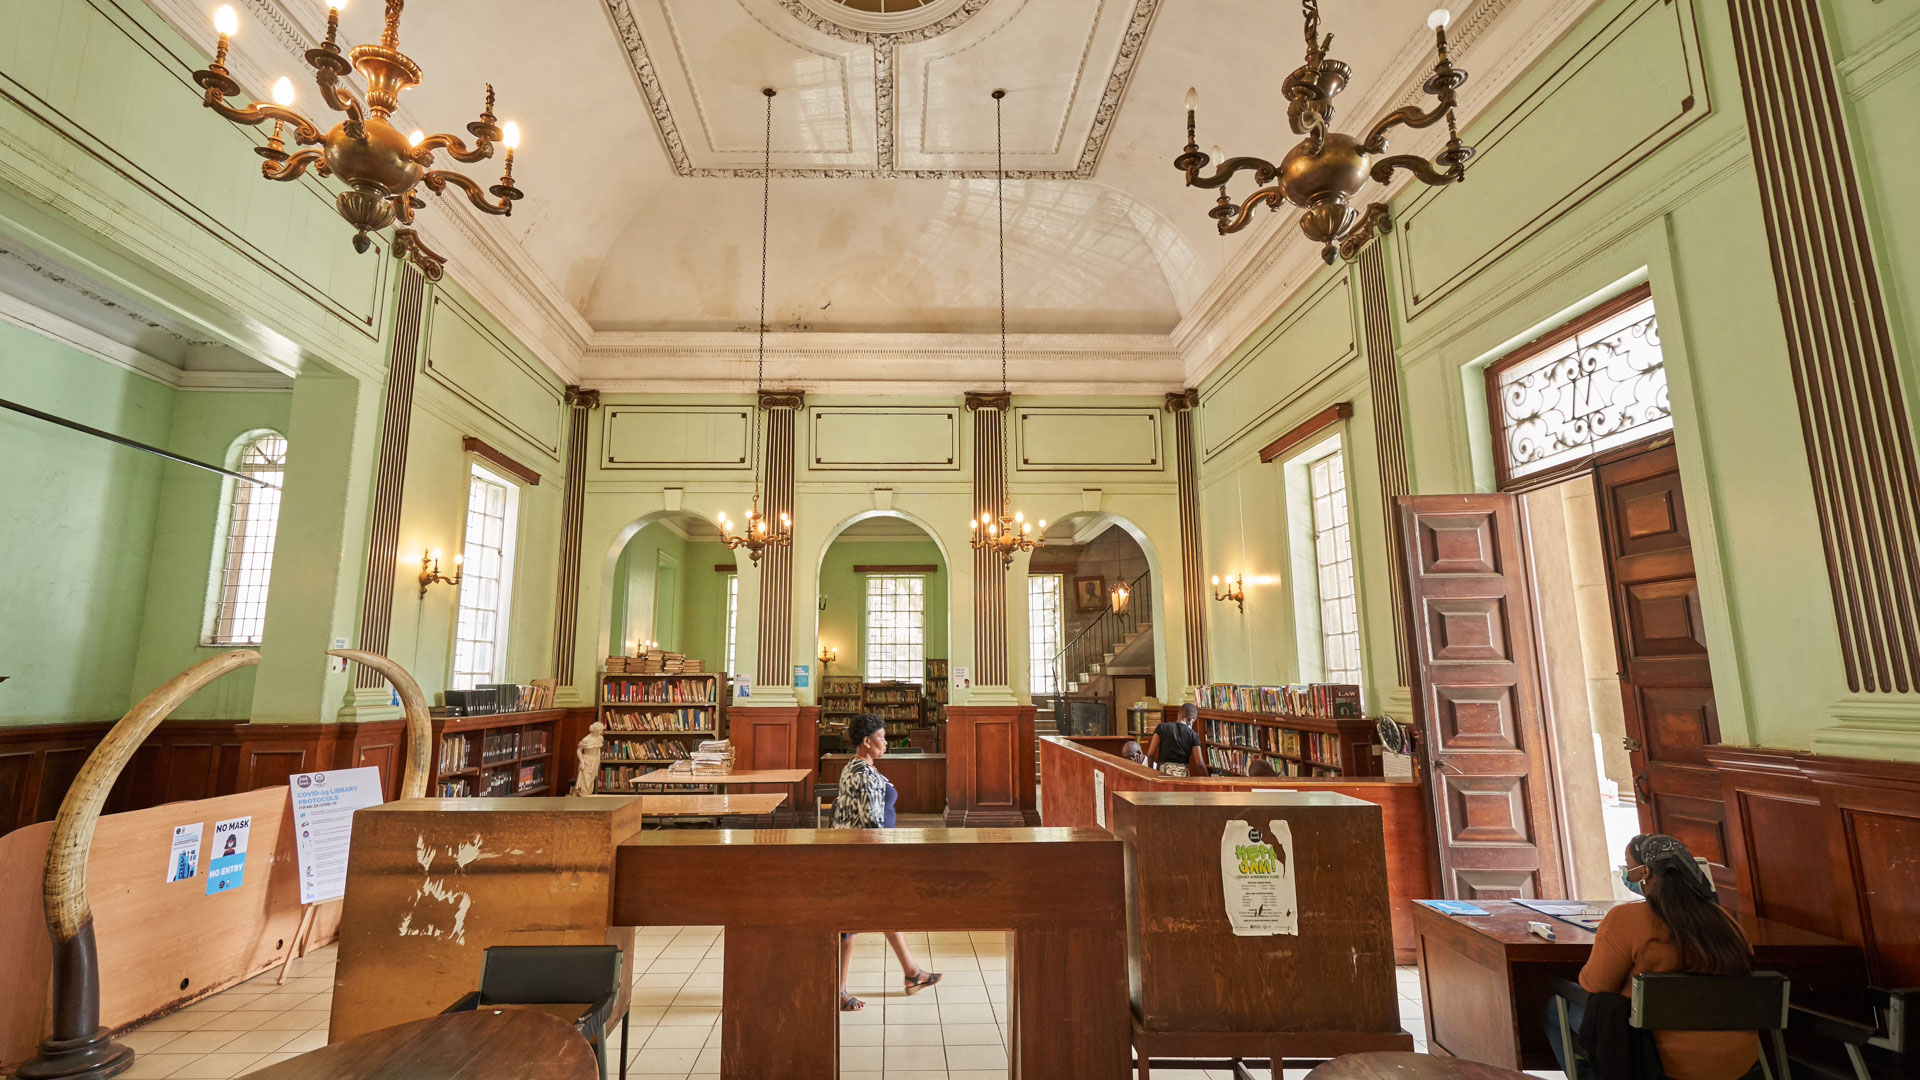 Above: Stepping into another time in The McMillan Memorial Library 